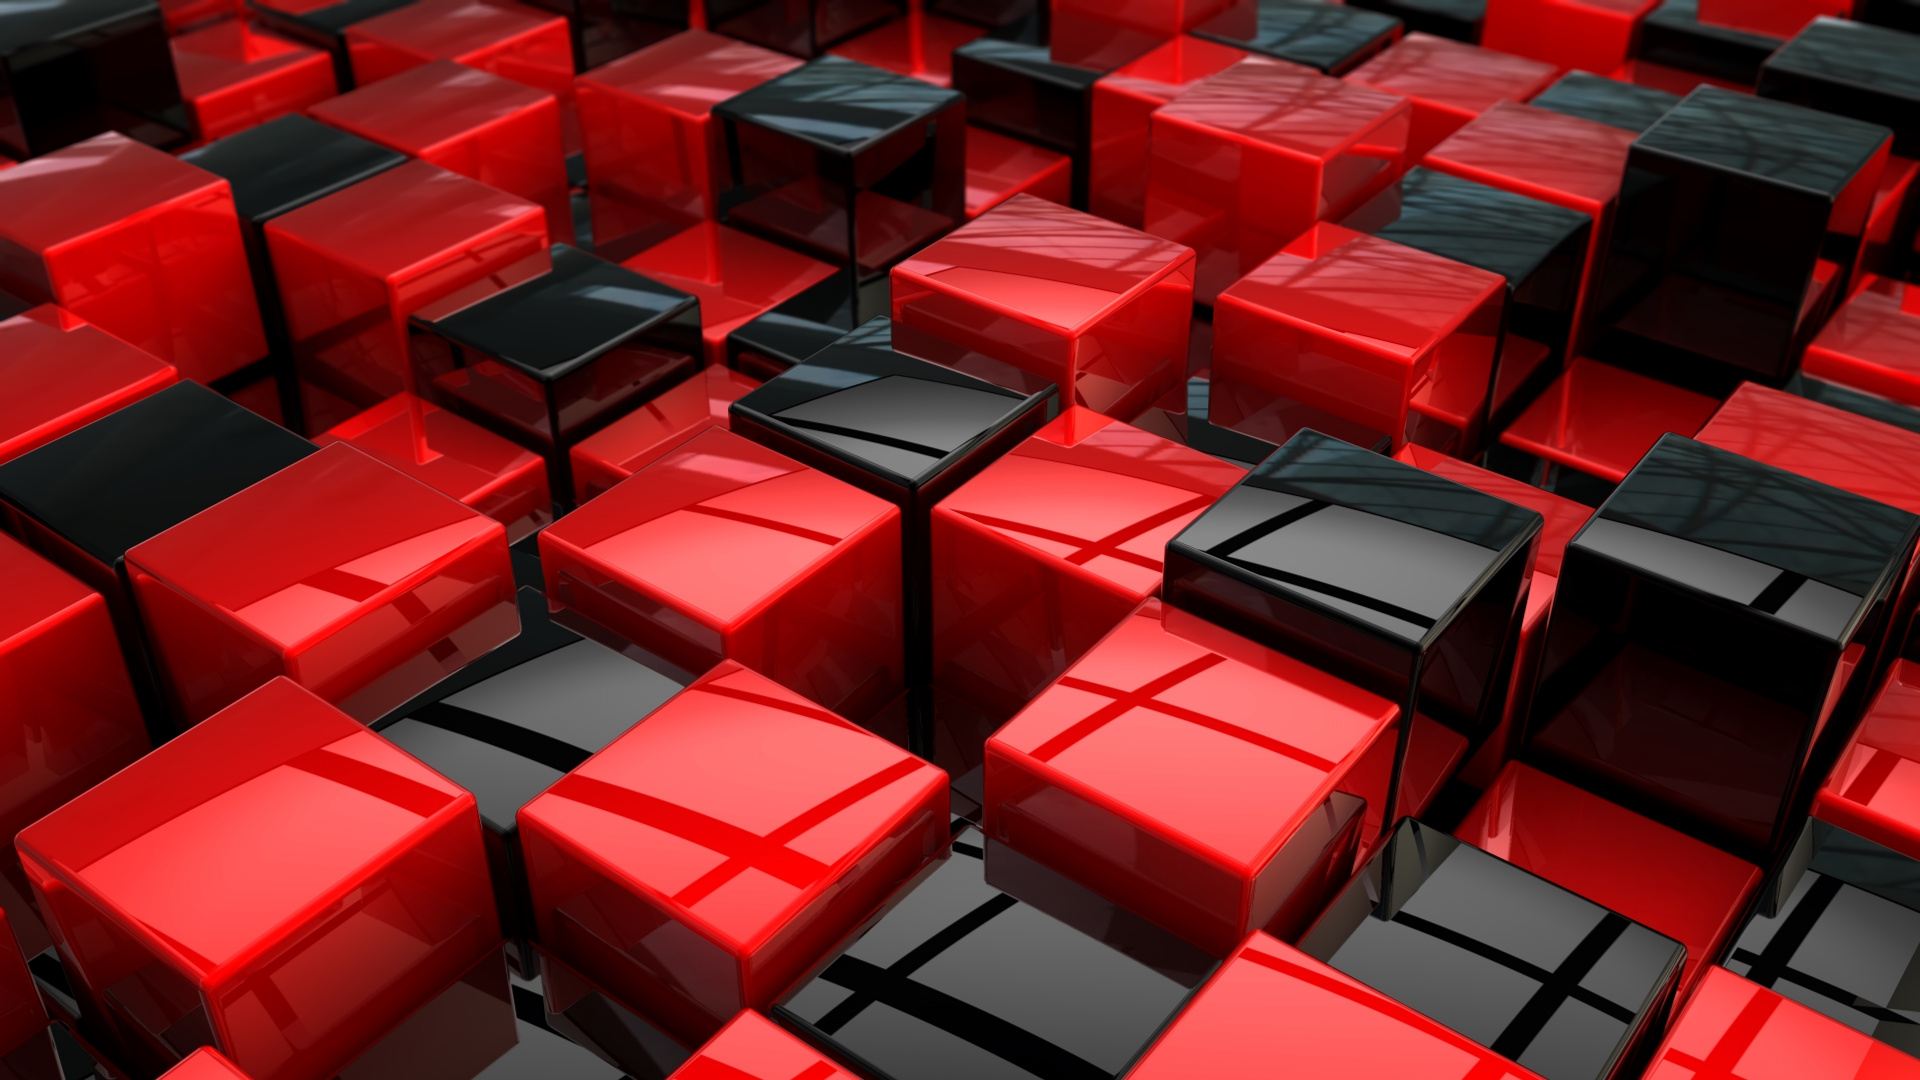 Download Cubes, red and black, pattern, surface wallpaper, 1920x Full HD, HDTV, FHD, 1080p